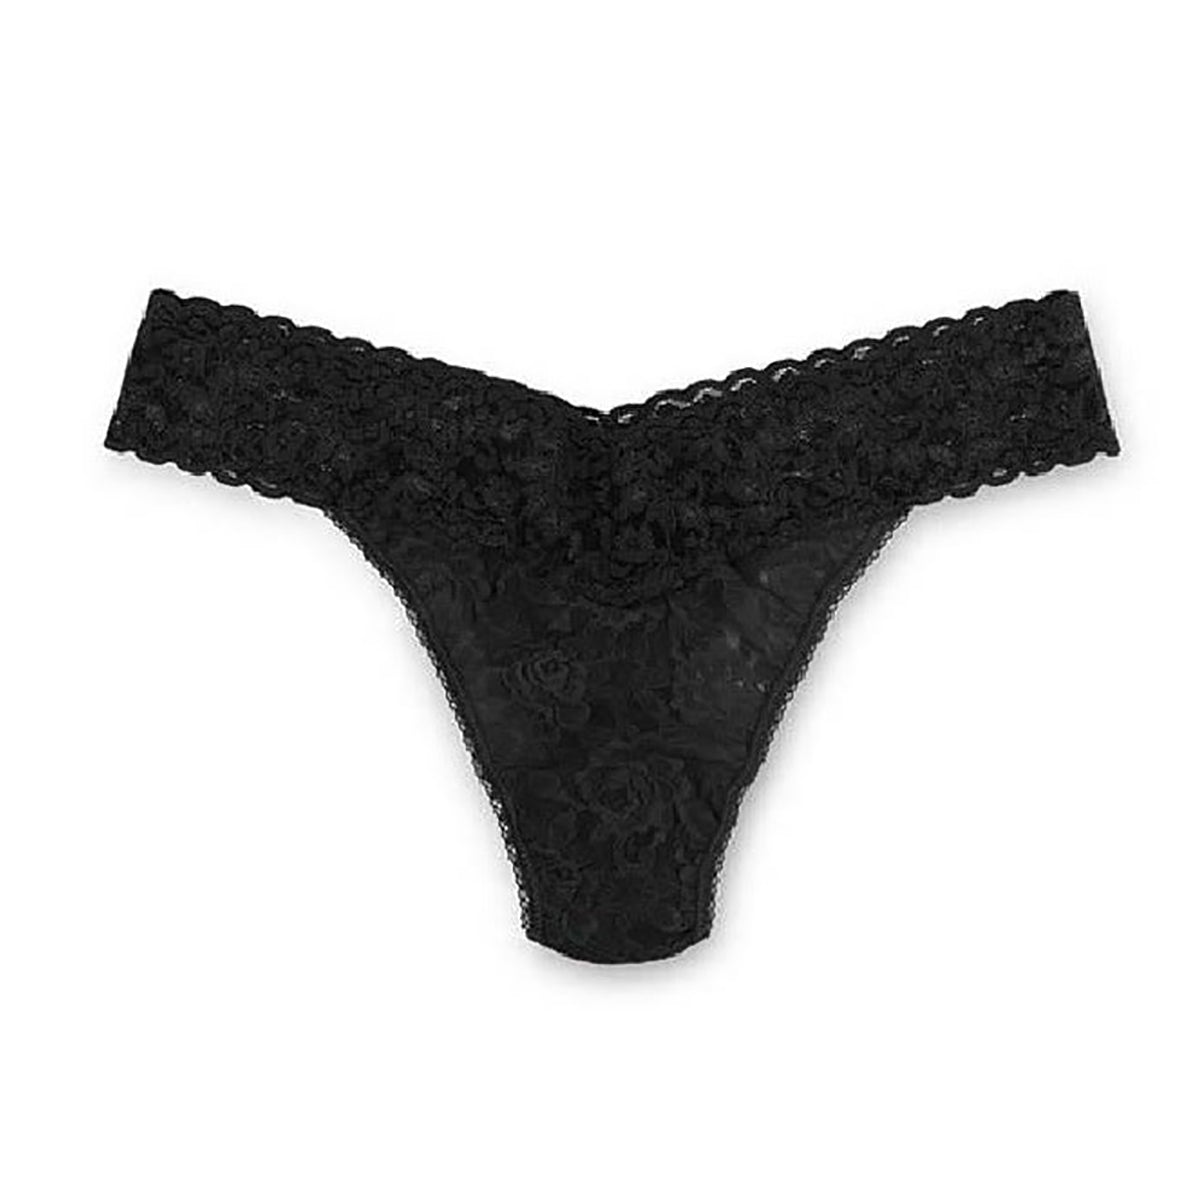 Hanky Panky Lace thong in black lace panty lingerie canada linea intima toronto original rise thong